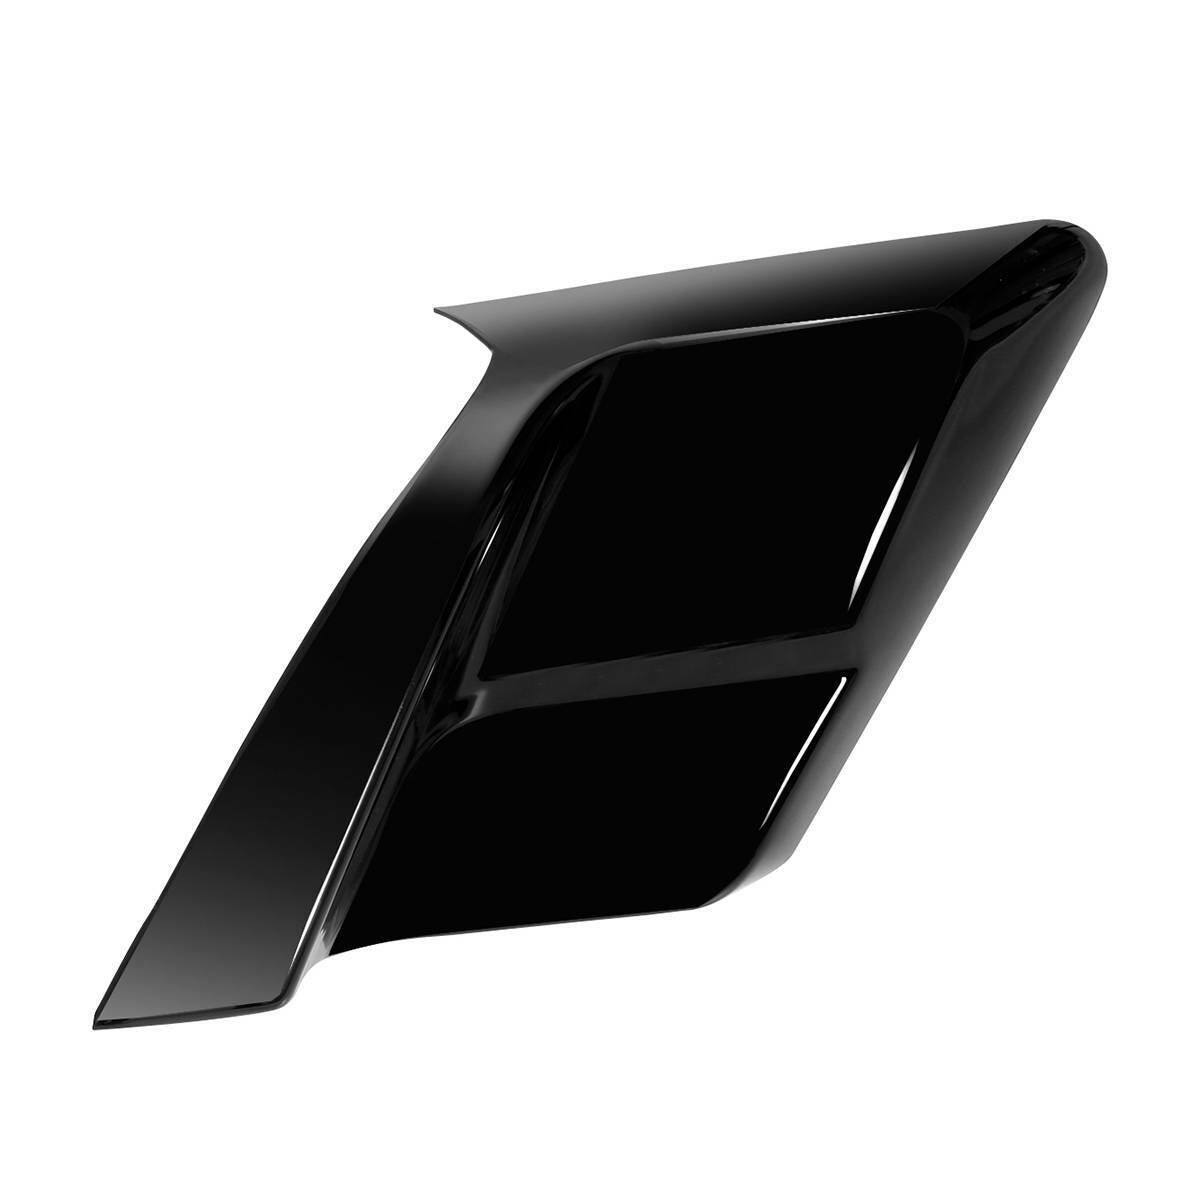 Vivid Black Extended Stretched Side Cover Panel Fit For Harley Touring 2014-2021 - Moto Life Products